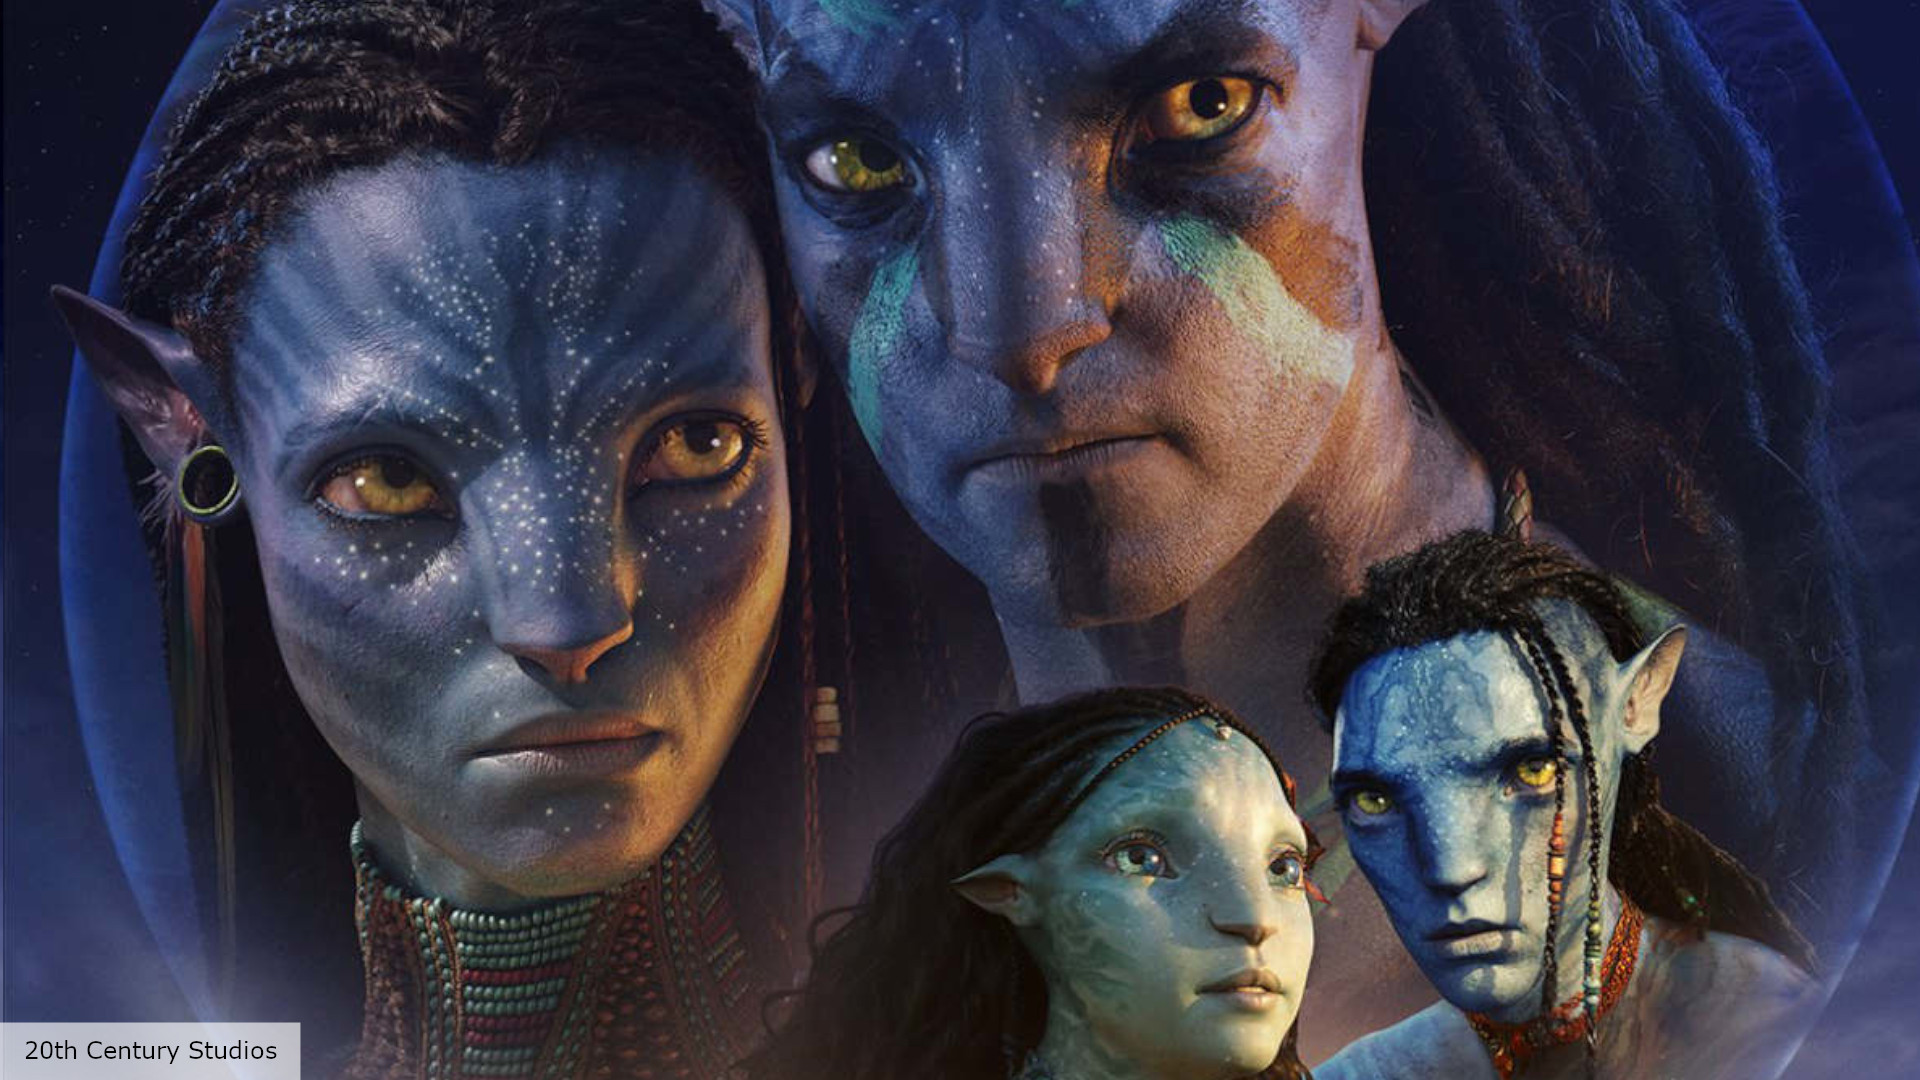 How Much Avatar Sequel Has to Make at Box Office to Break Even